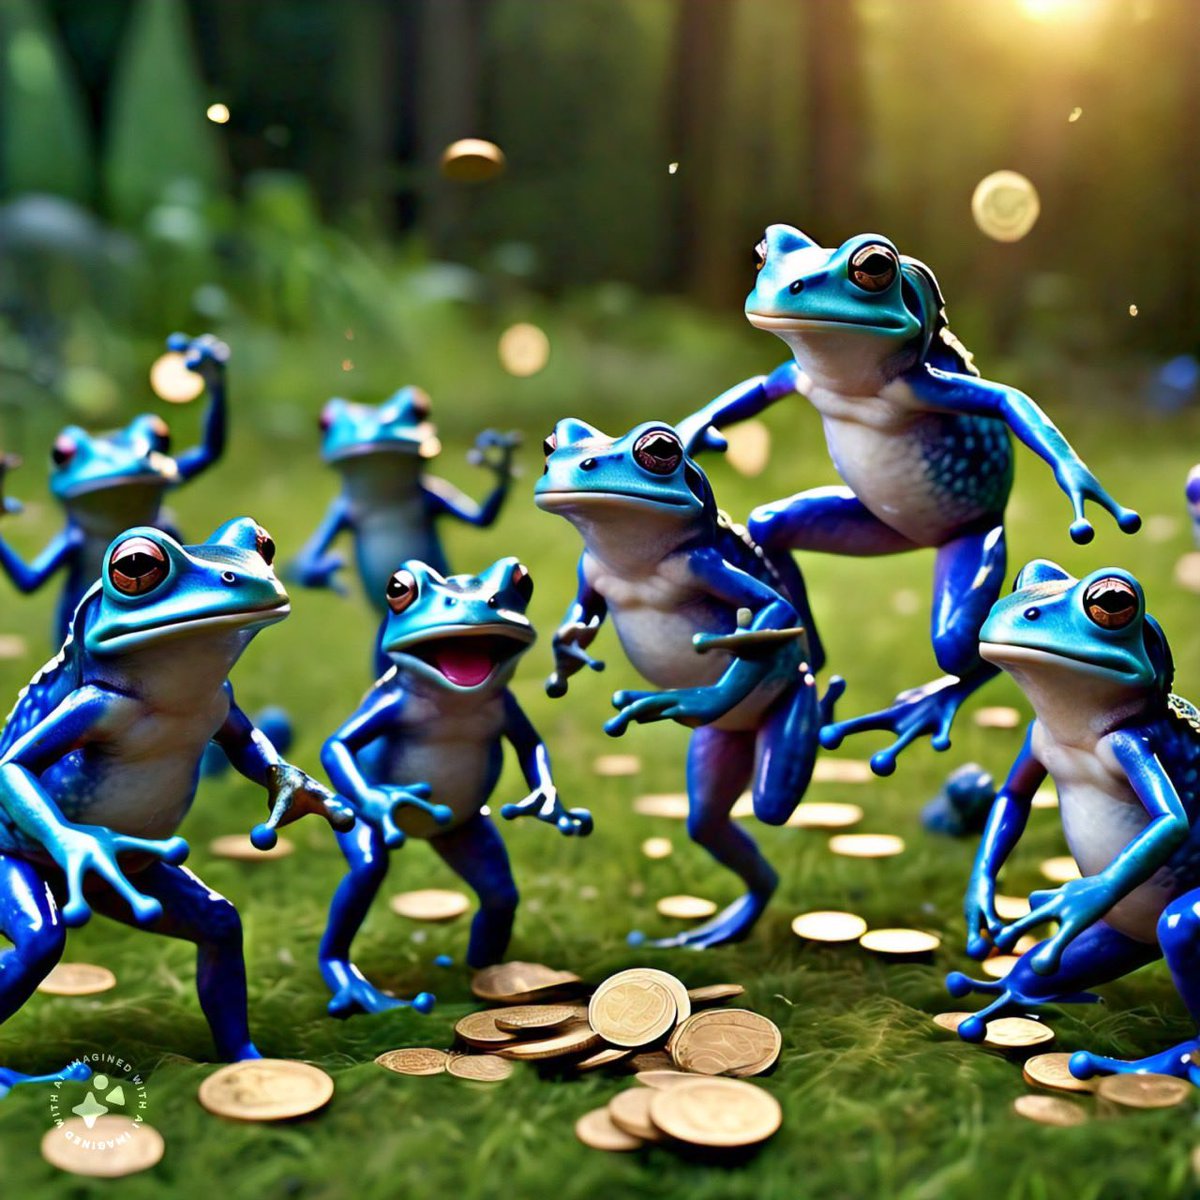 “When Froggy Coin hits that high price, everyone will be leaping into a whole new level of financial success! 🚀

#RibbitRiches #ToTheMoonAndBack #CryptoFrog #LeapToSuccess #HoppingToWealth #FroggyFinance #GreenCoins #HoppyInvestment